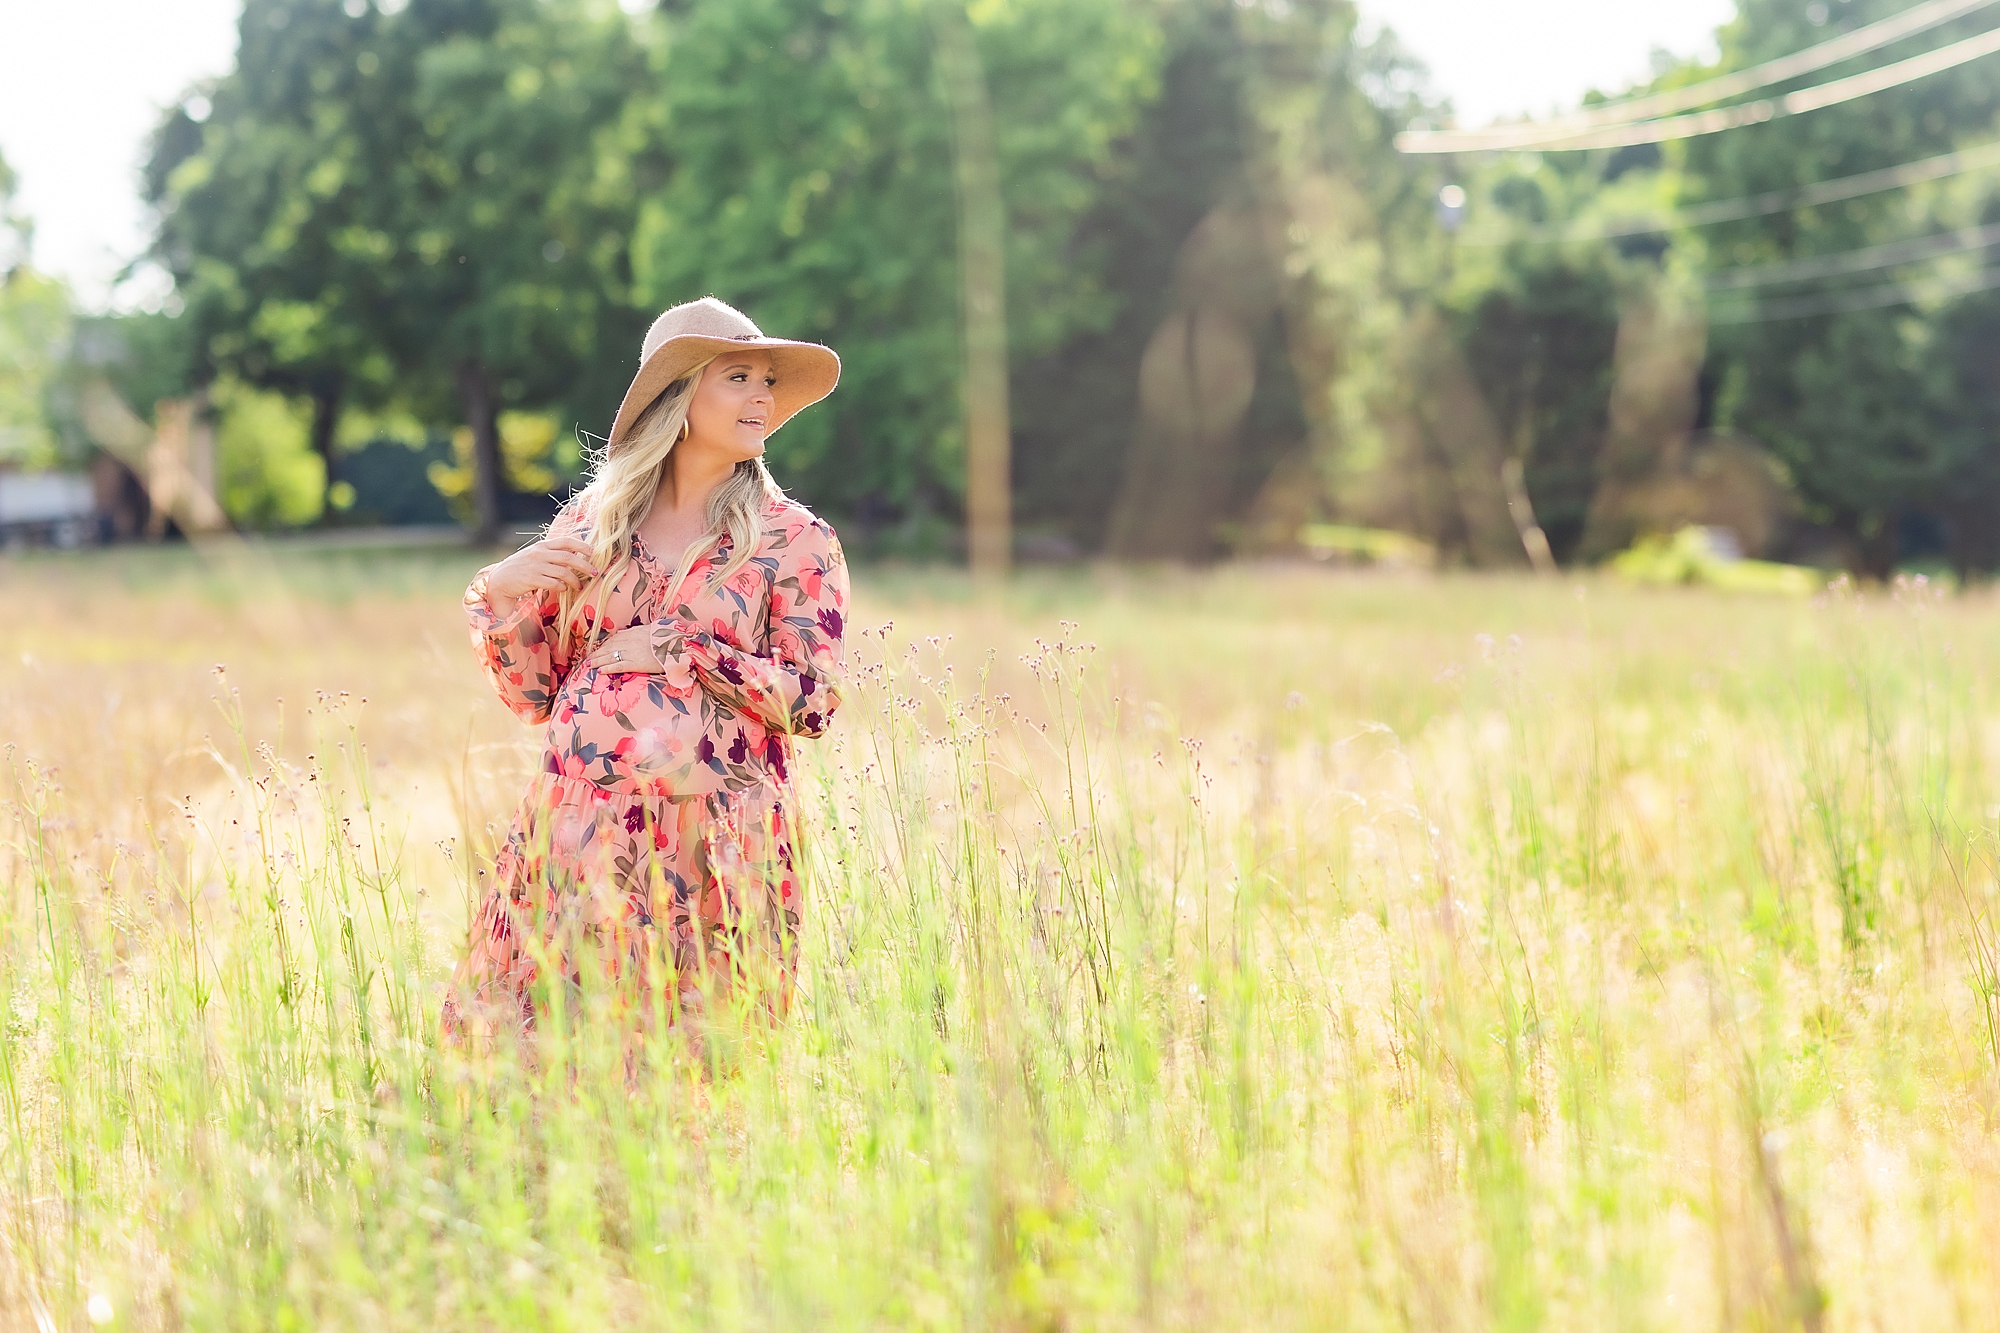 maternity portraits in Charlotte field for mother wearing floppy hat